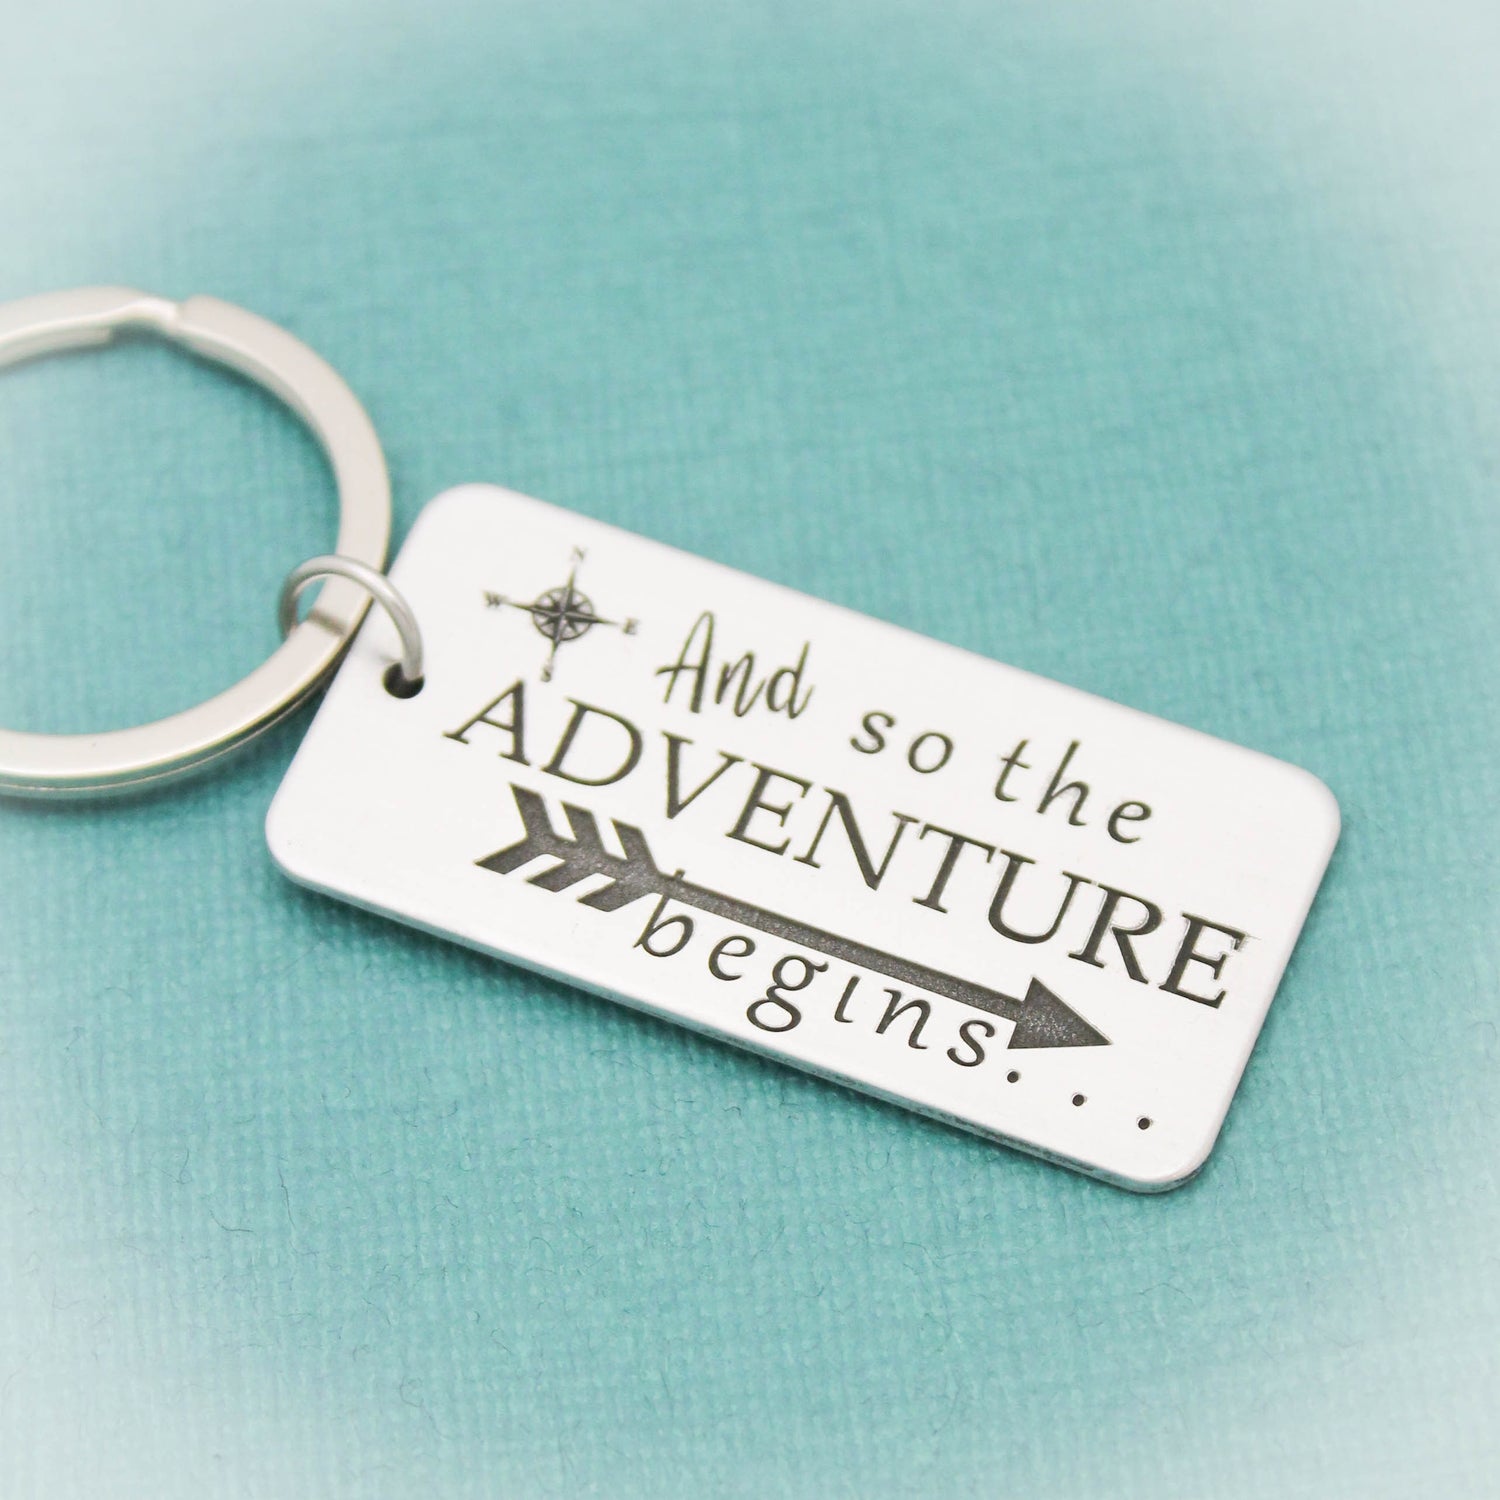 Graduation Keychain, And So the Adventure Begins Keychain, Grad Keychain, Graduation Gifts, Grad Keychain for Him, Graduate Gift for Her